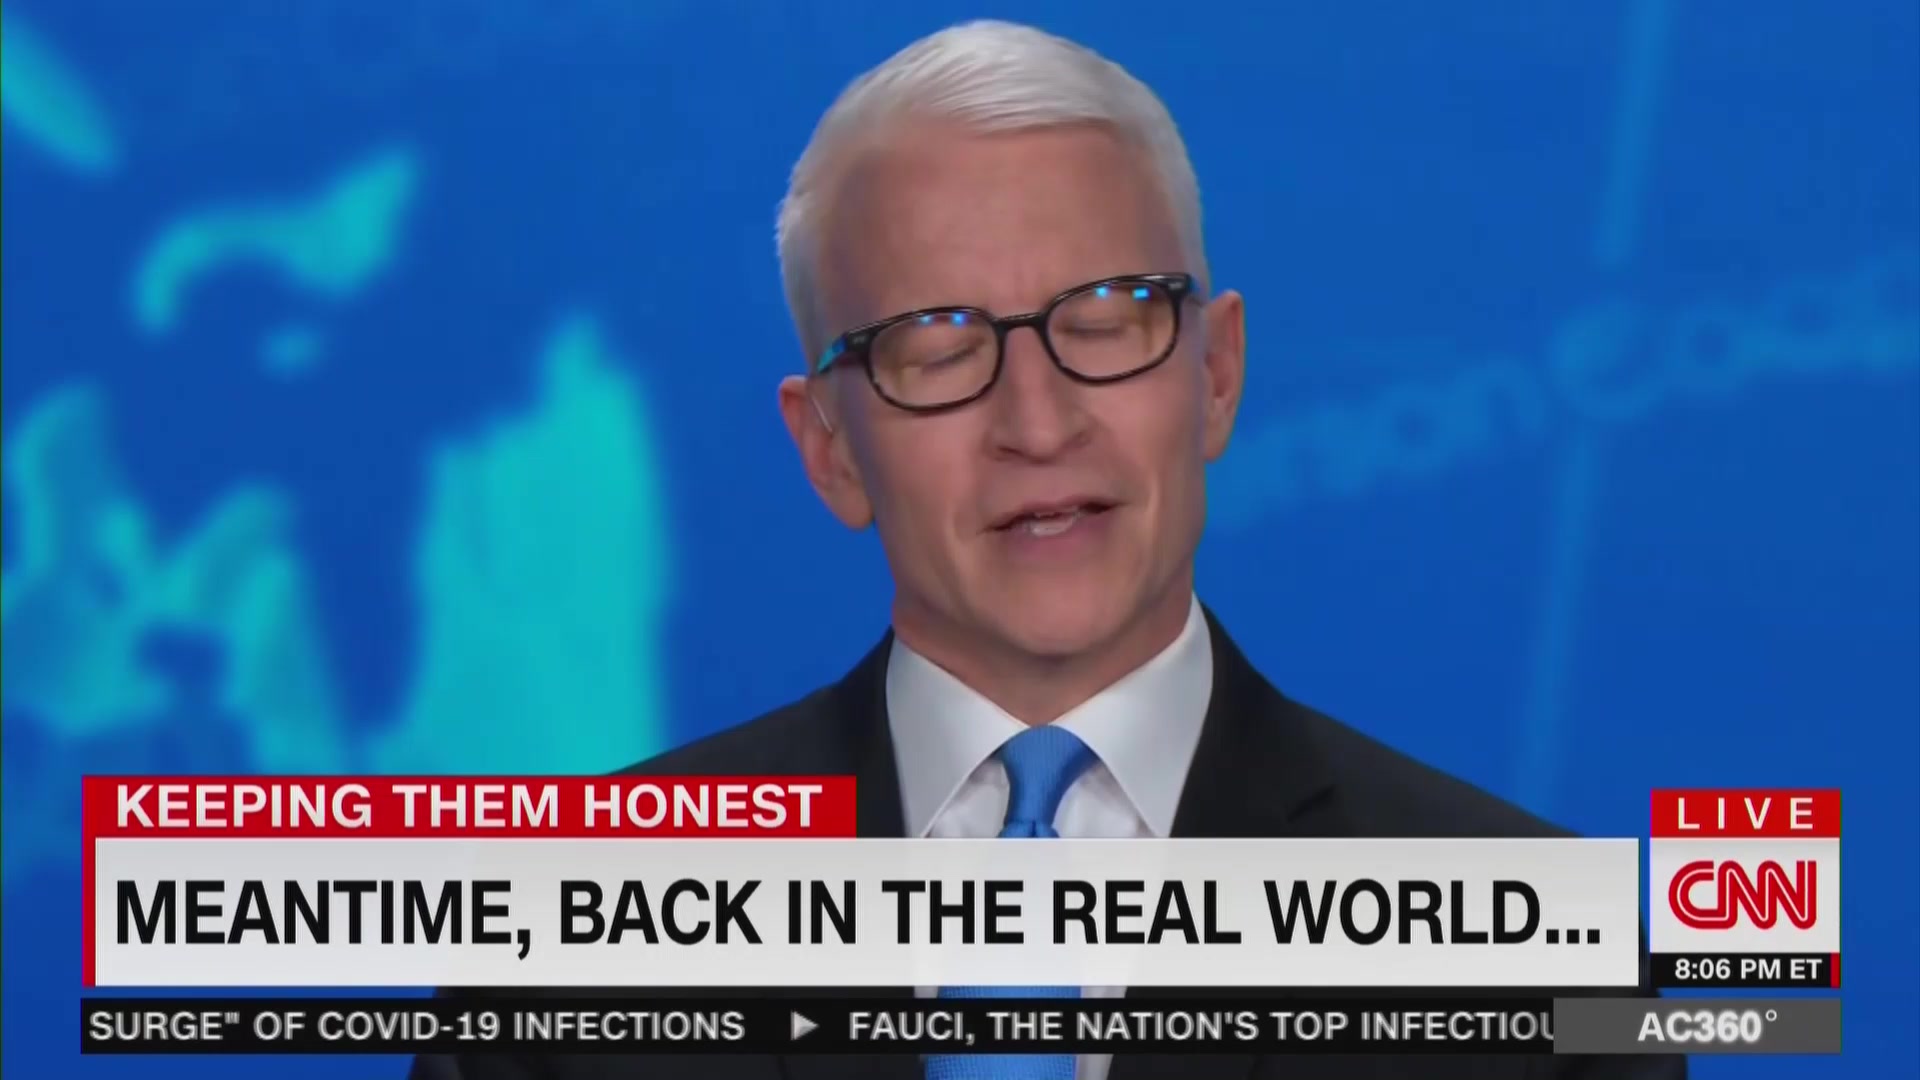 Anderson Cooper Tears Into Trump Over Coronavirus Hypocrisy: He’s ‘Living in a Biological Bunker’